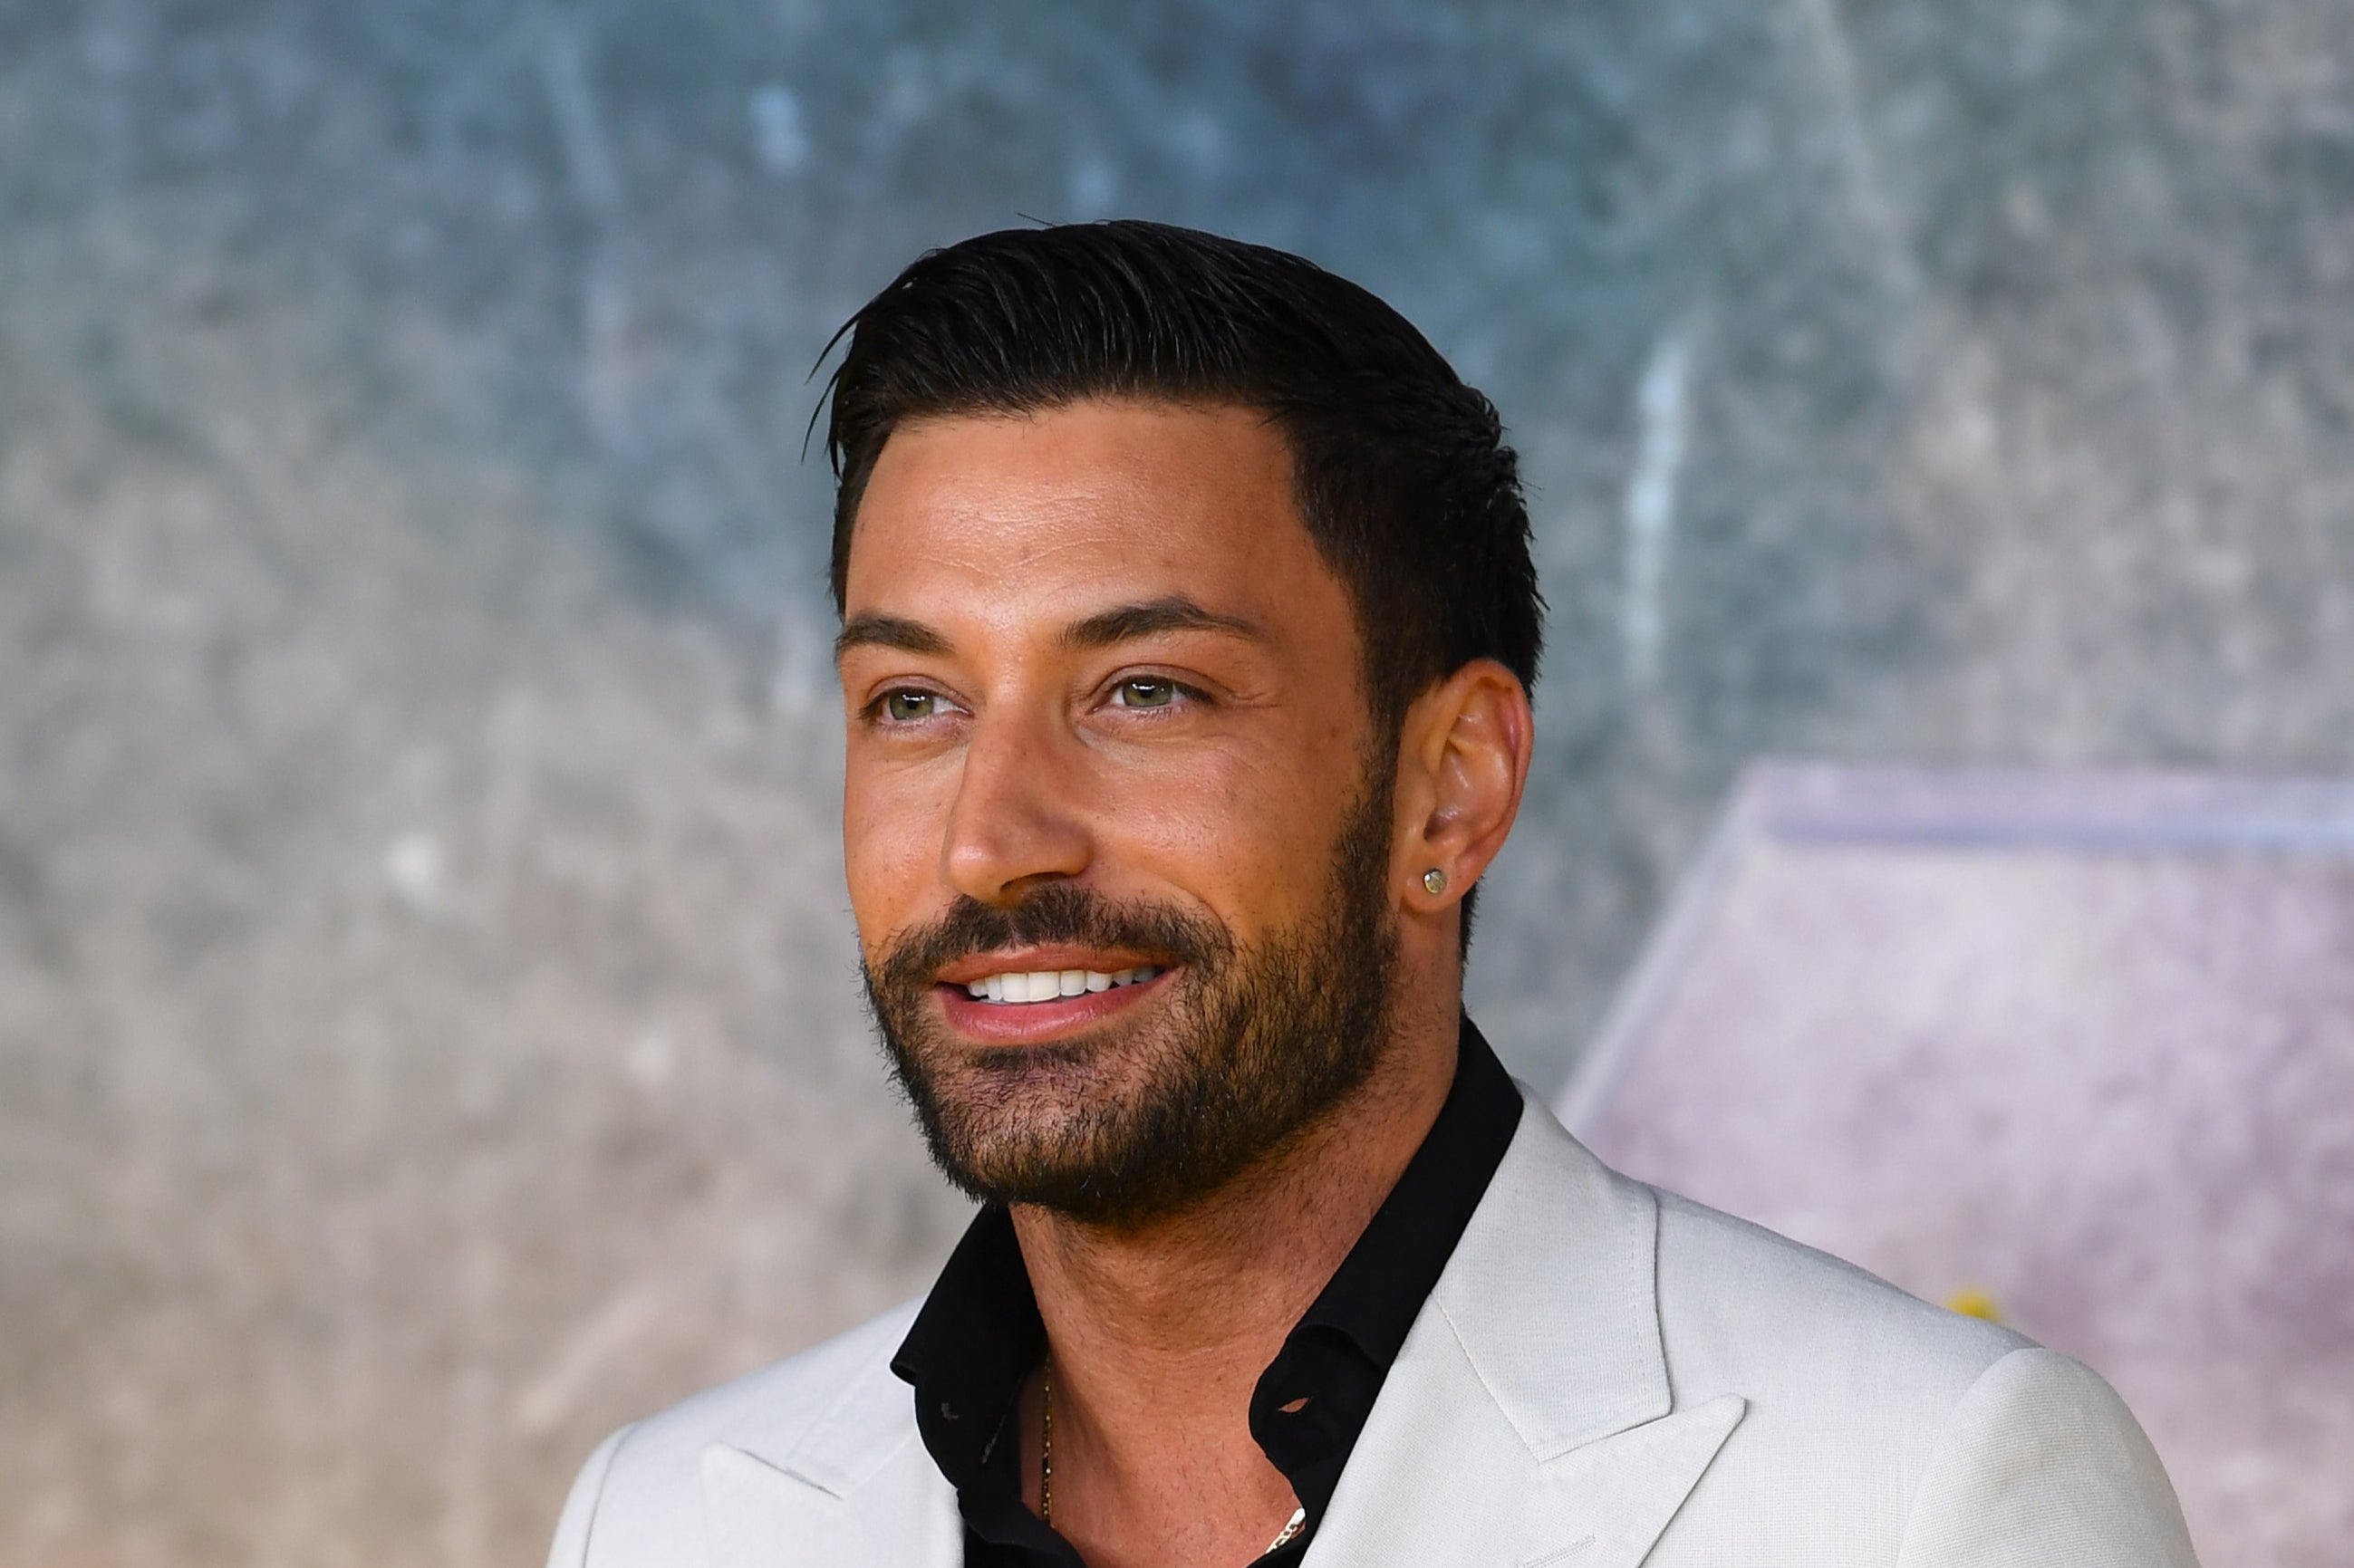 strictly come dancing, giovanni pernice, giovanni pernice and anton du beke’s travel series reportedly ‘shelved’ amid misconduct allegations